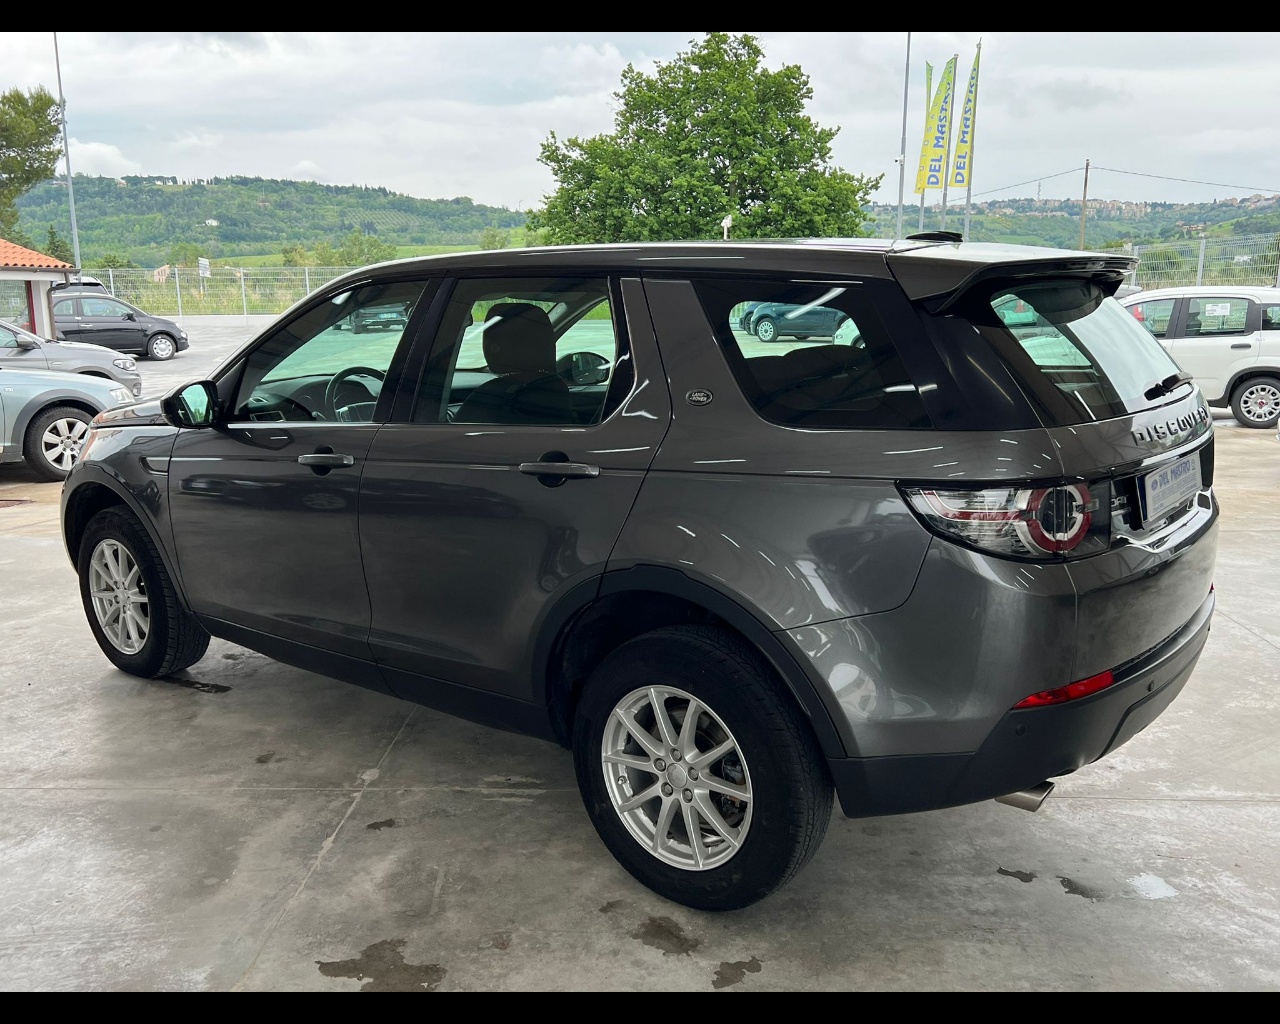 LAND ROVER           Discovery Sport                          Discovery Sport 2.2 TD4 S                                   